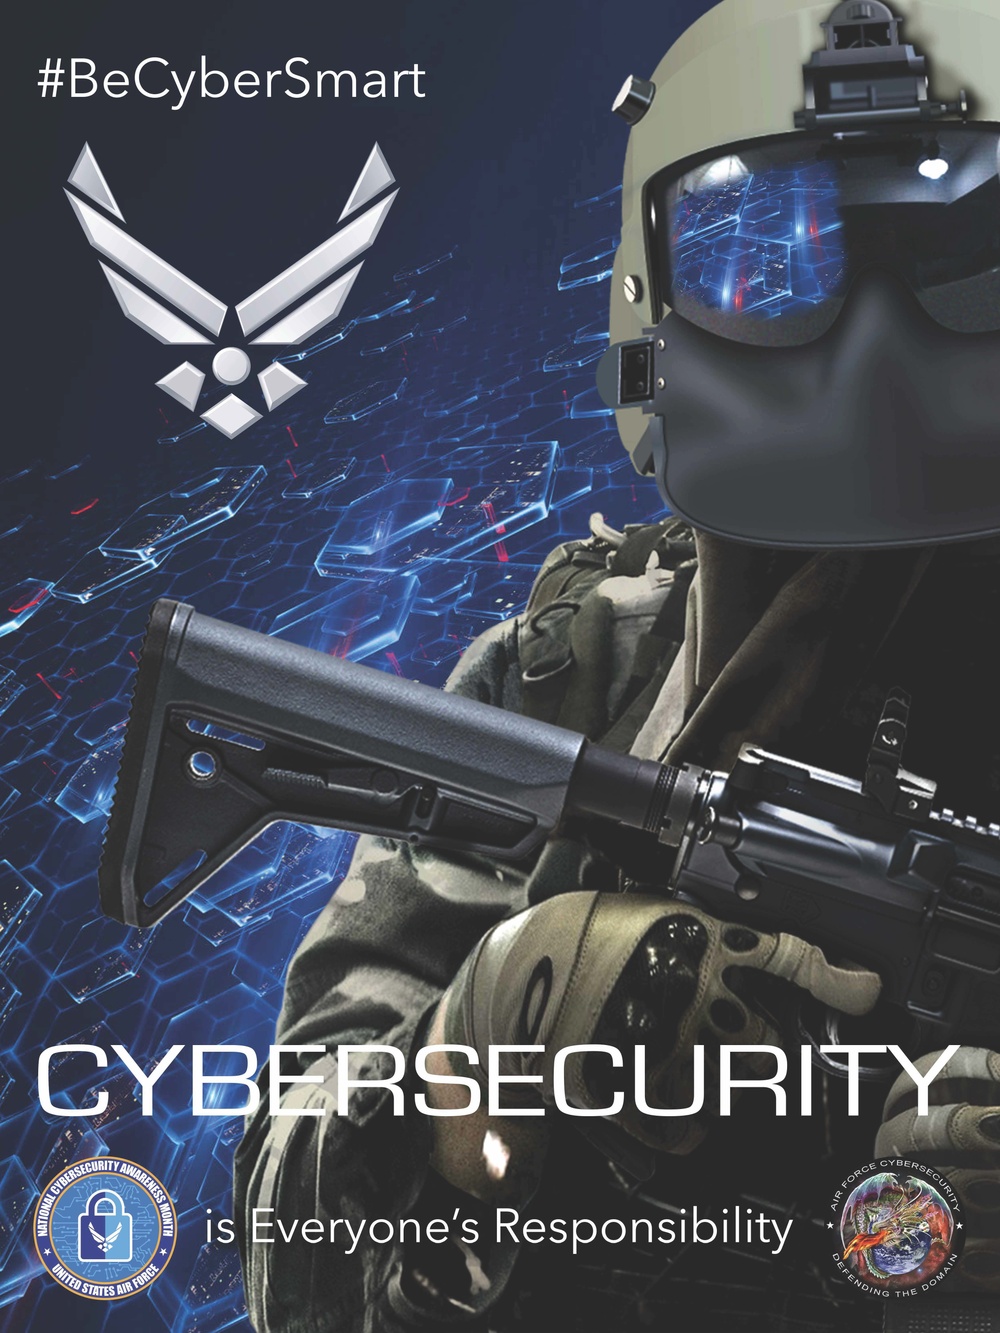 Air Force observes National Cybersecurity Awareness Month